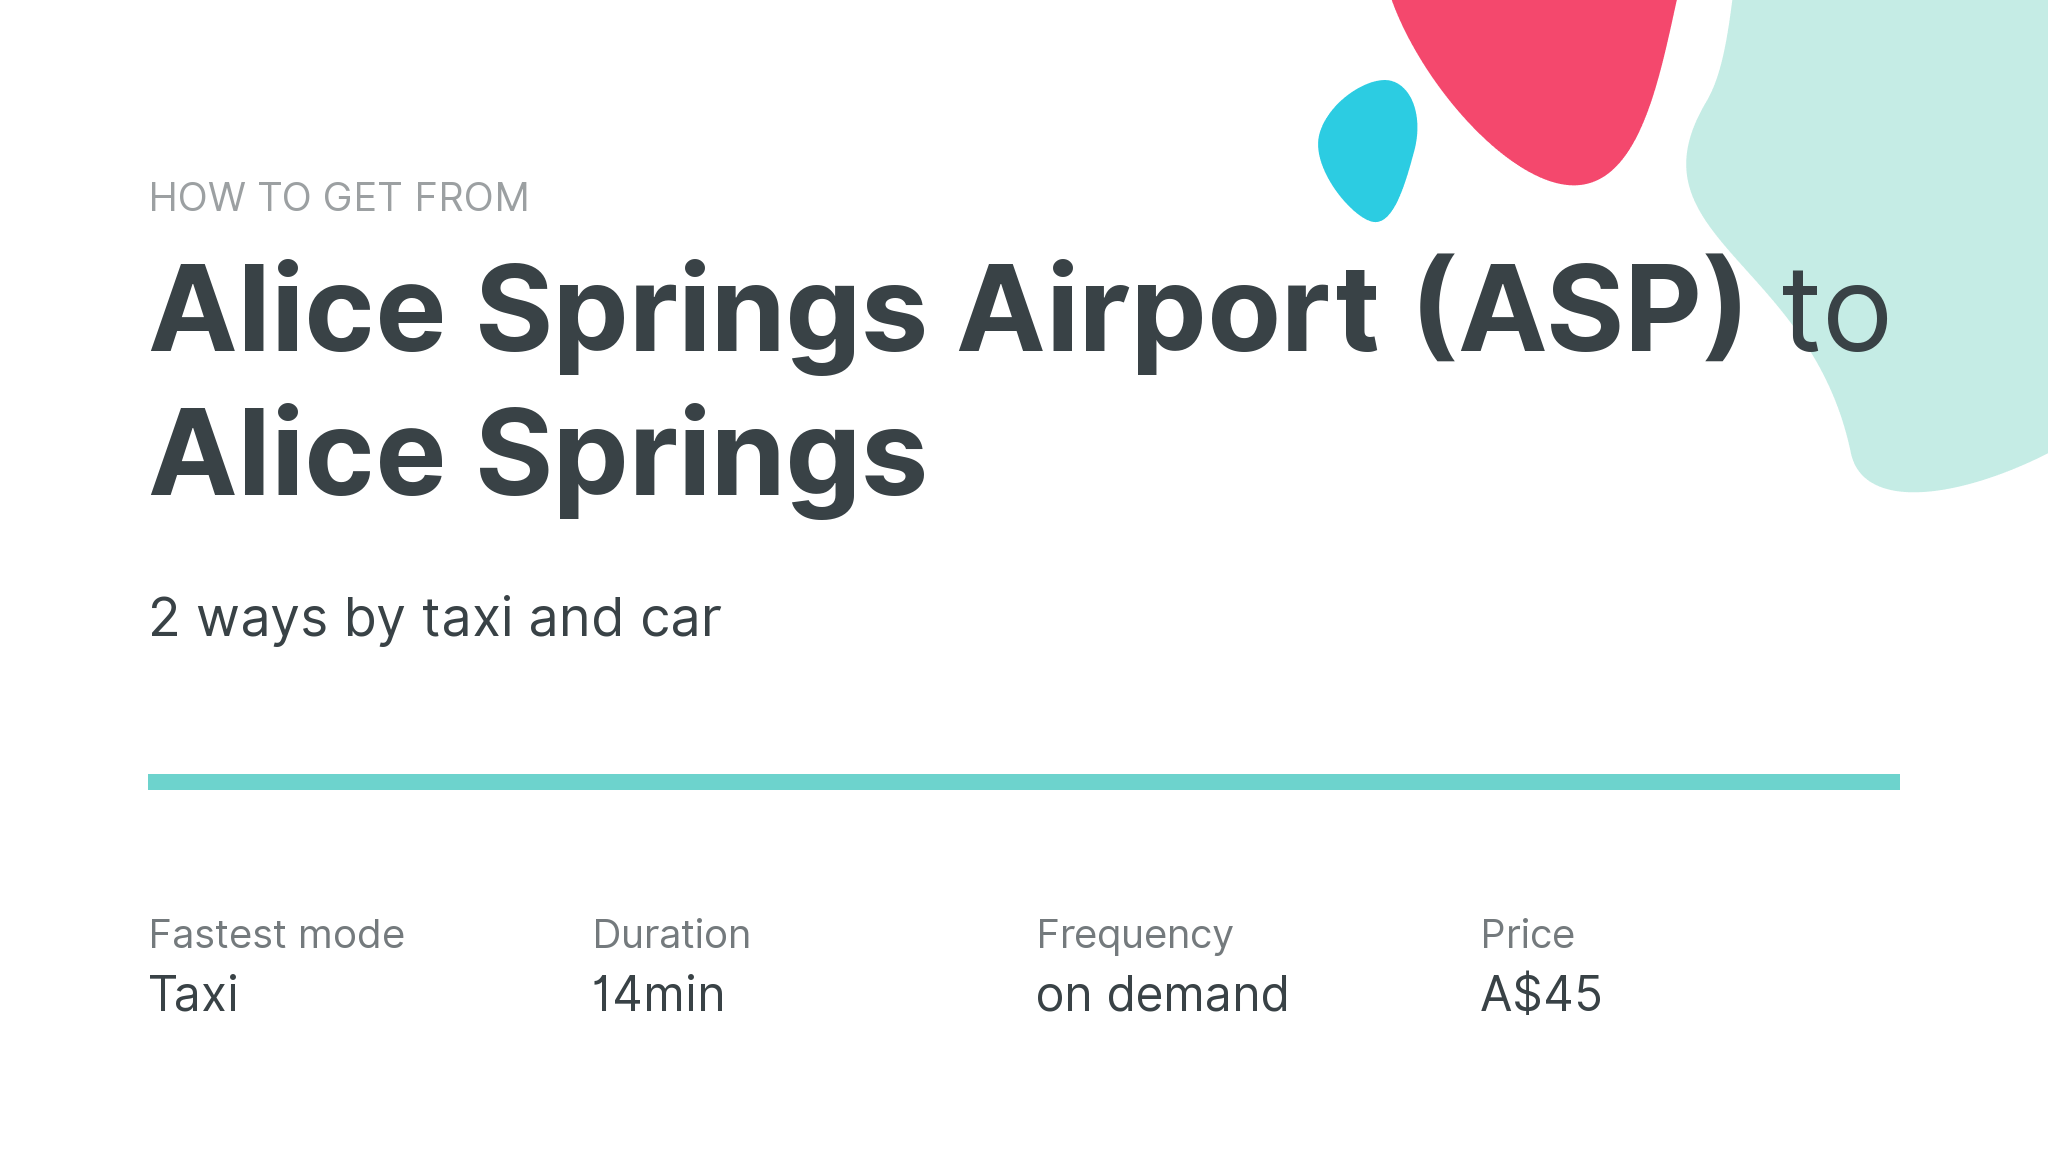 How do I get from Alice Springs Airport (ASP) to Alice Springs